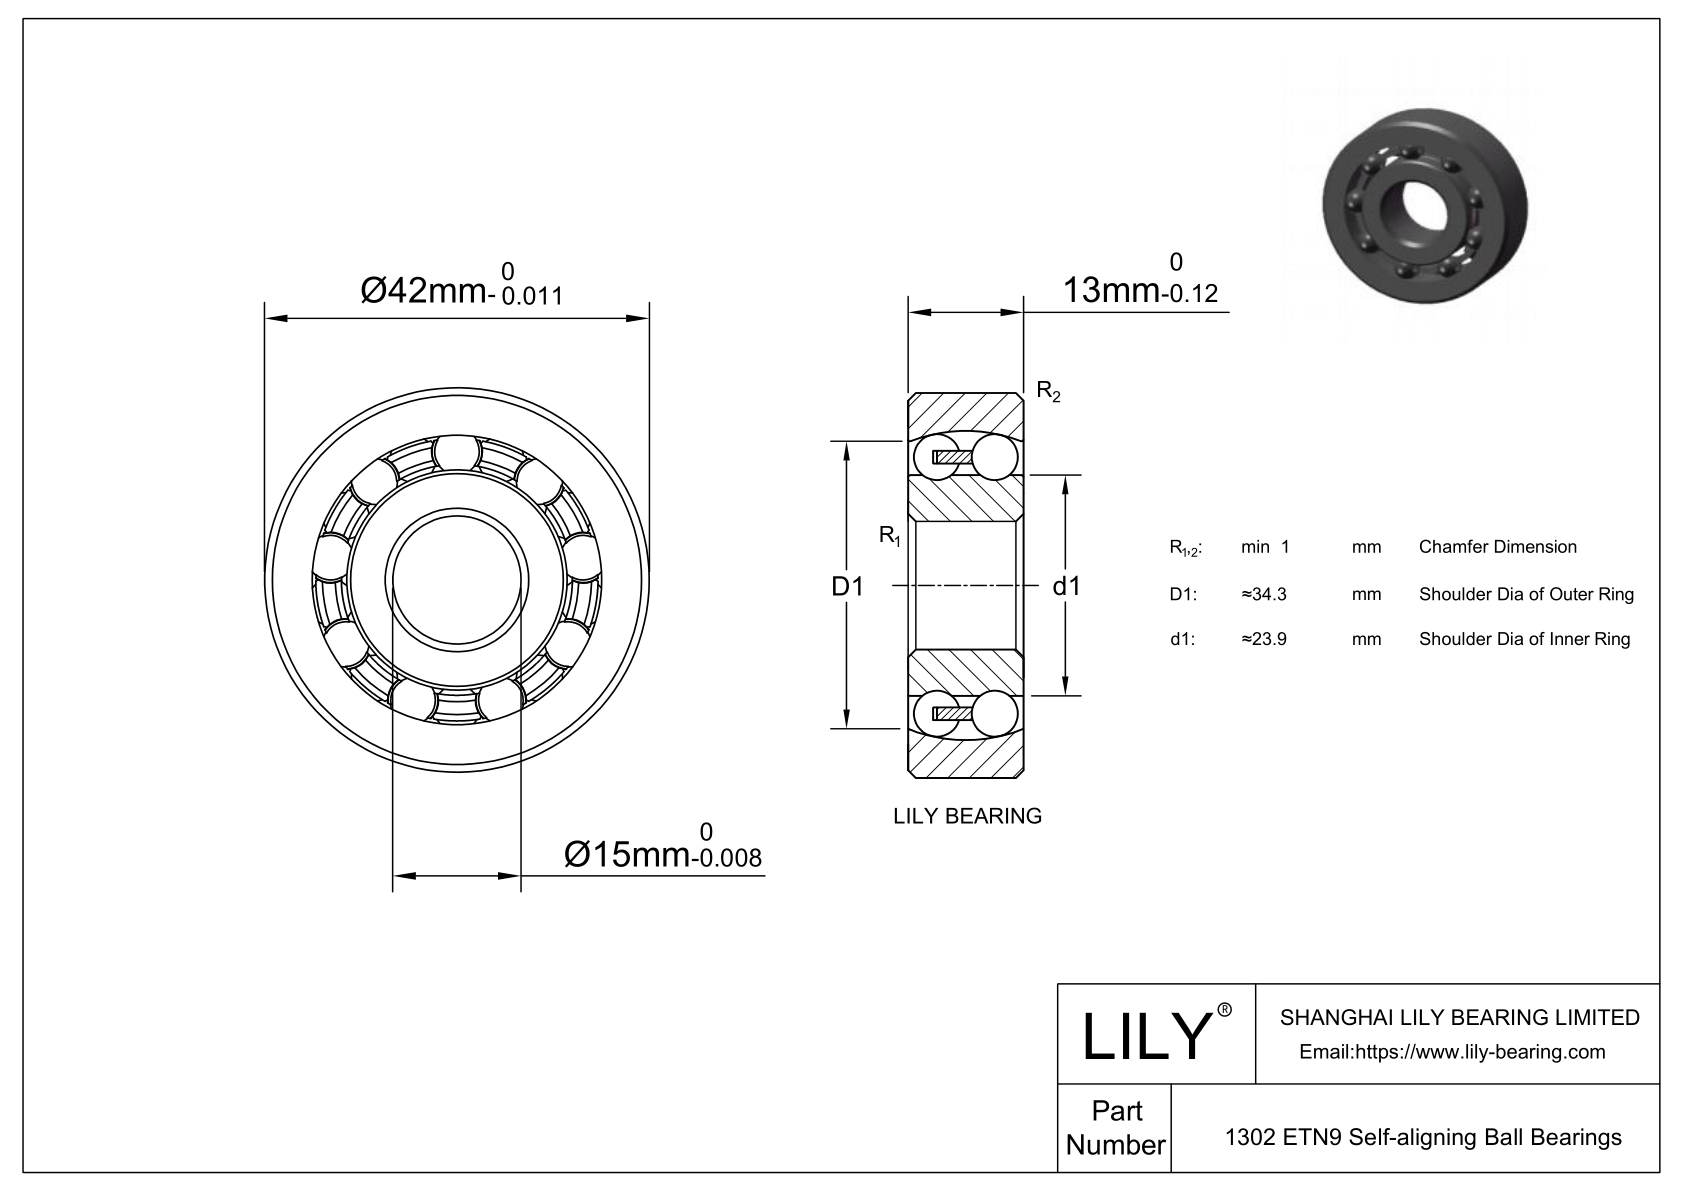 S1302 ETN9 Stainless Steel Self Aligning Ball Bearings cad drawing